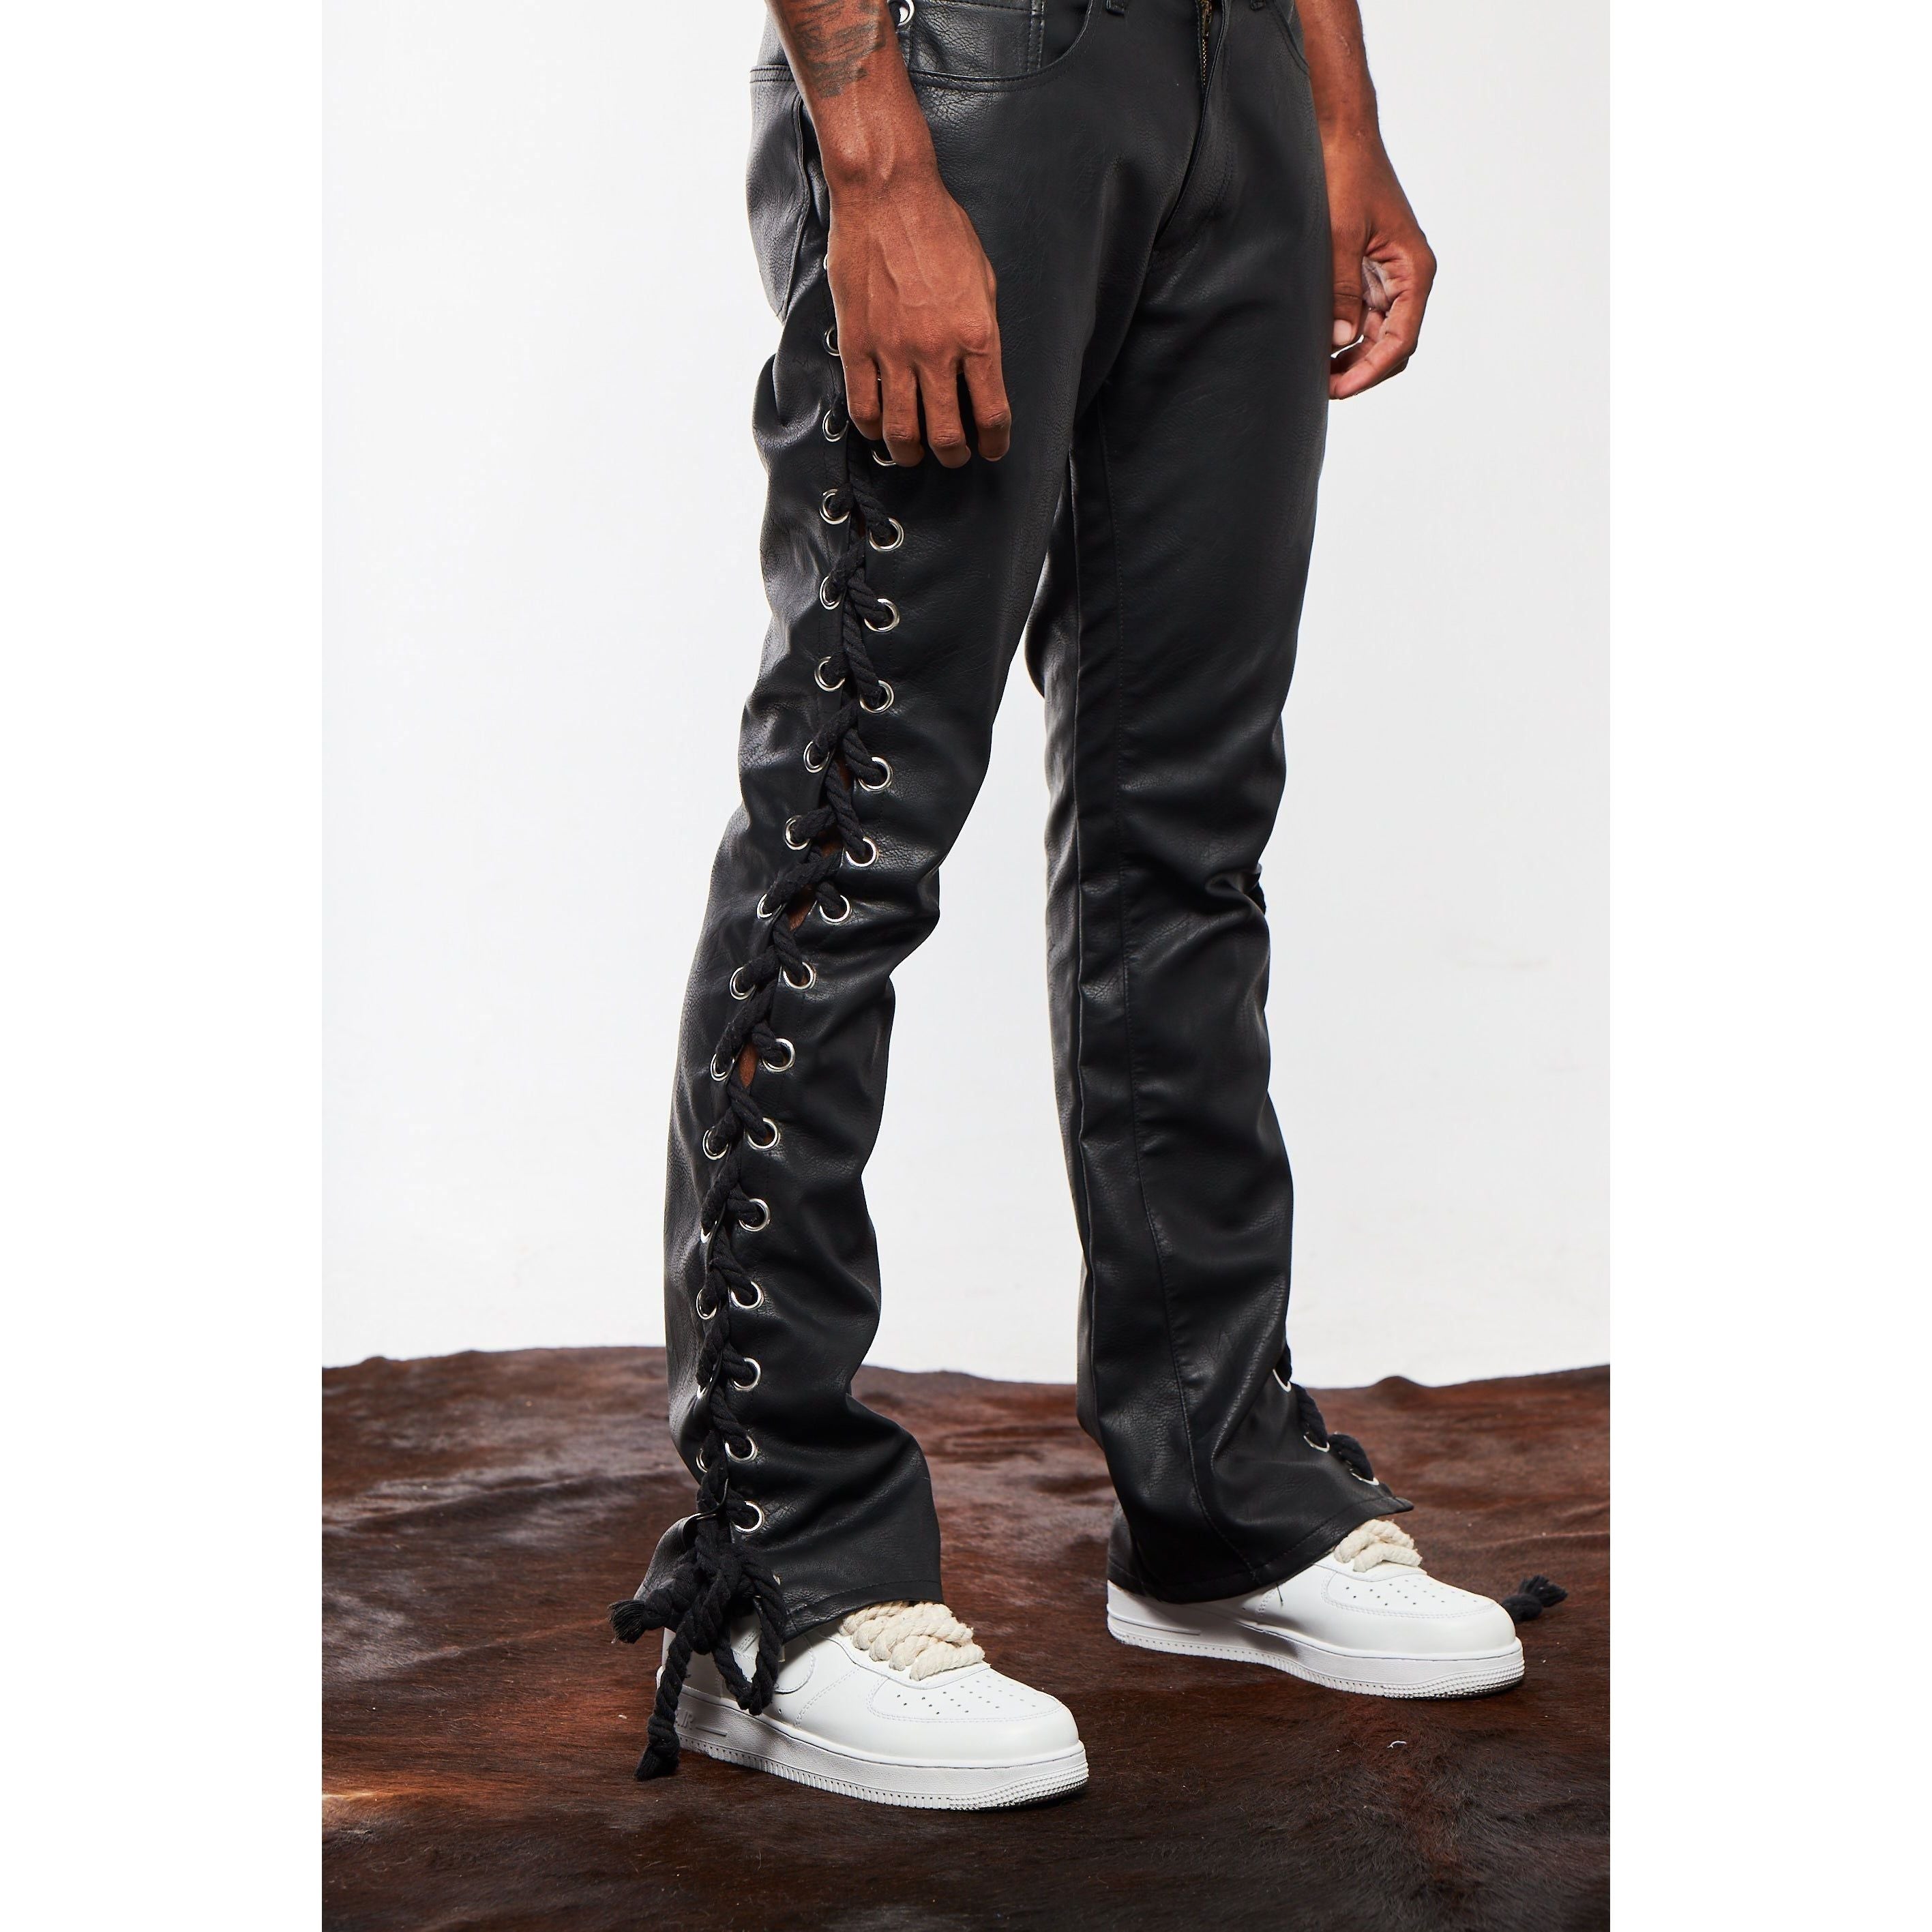 Rope Leather Pants (Black)